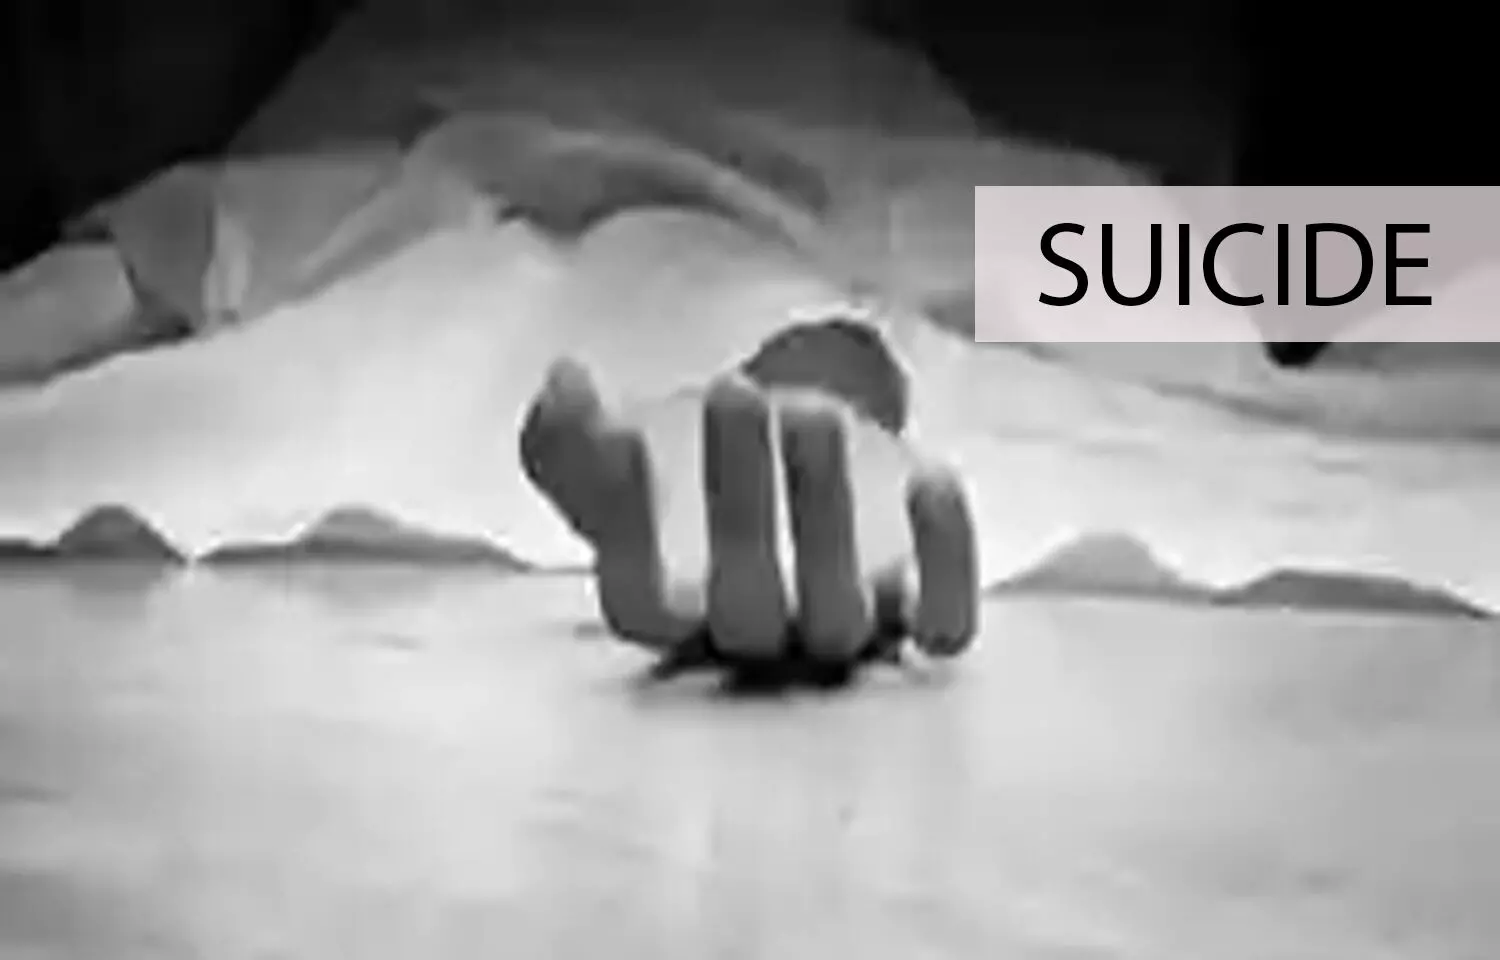 Unfortunate: PG Medical Student of RIMS allegedly commits suicide